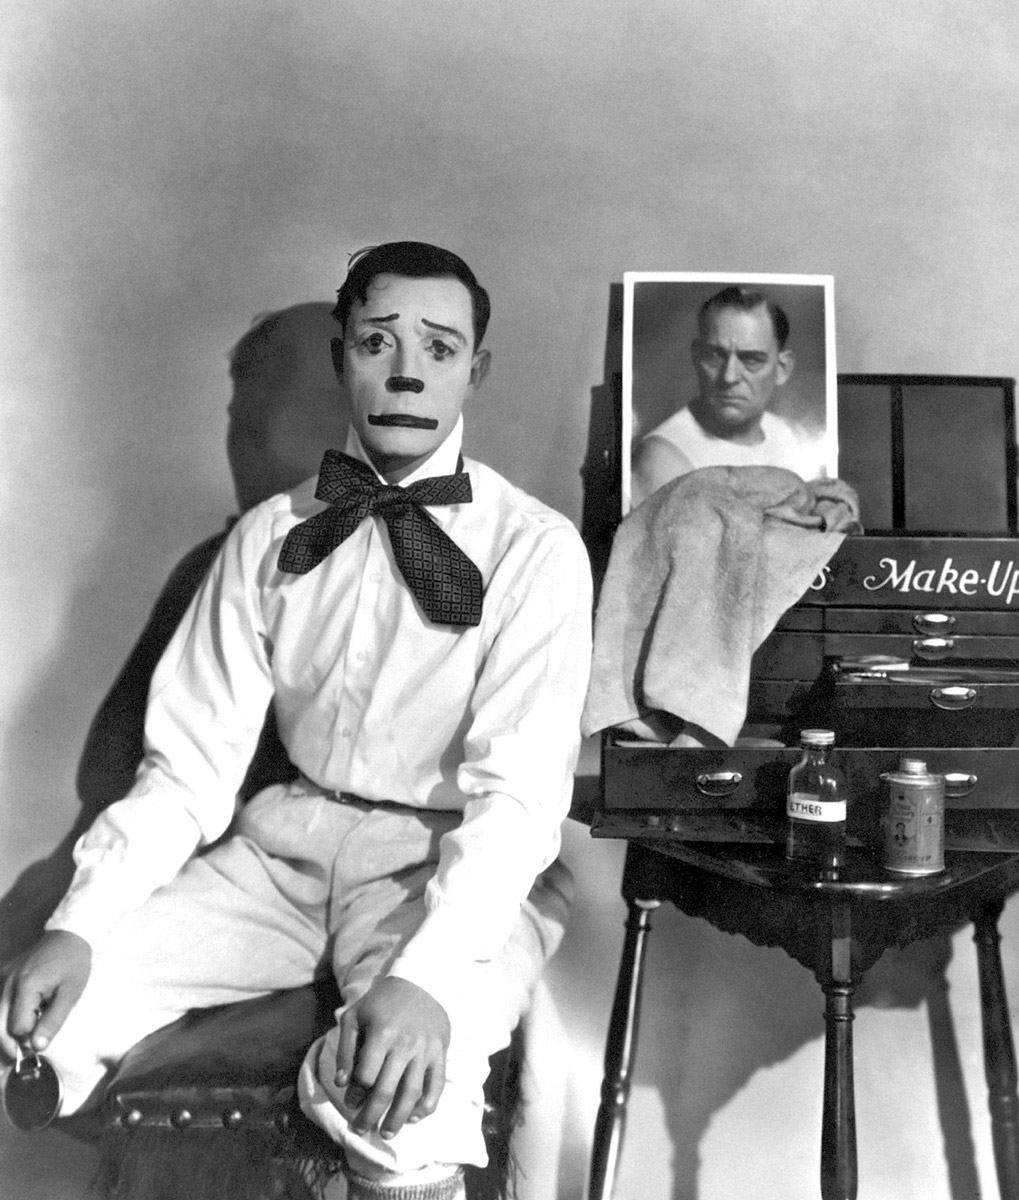 Publicity still from the 1930 film Free and Easy, Keaton’s first starring role in a talkie.